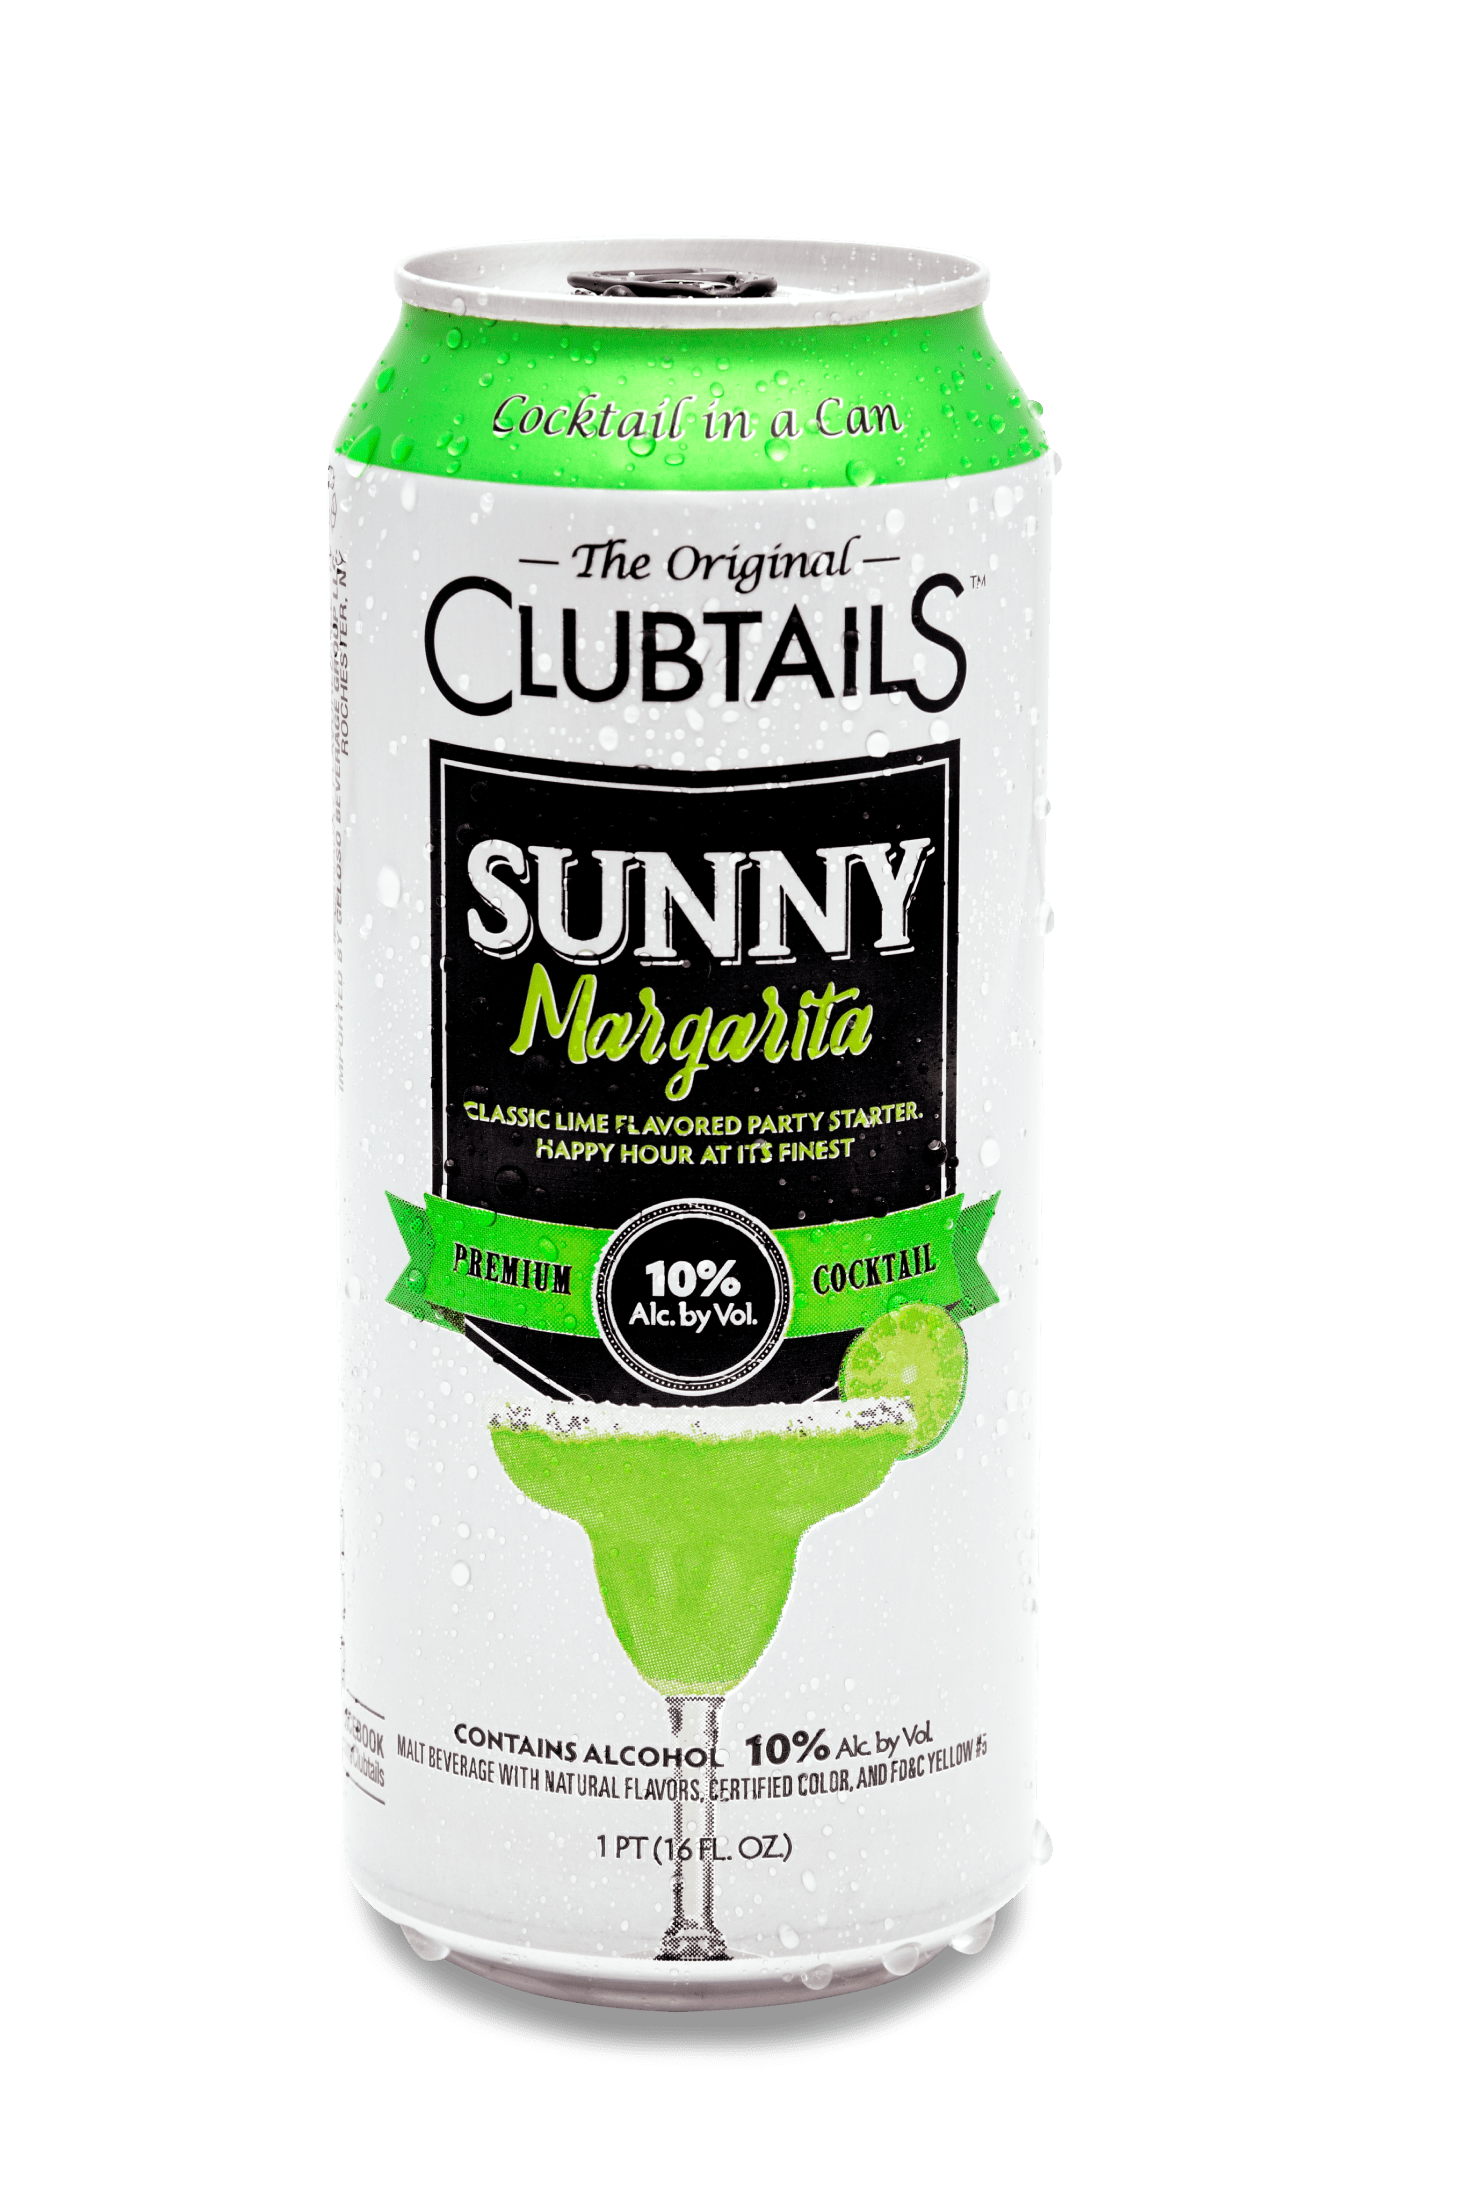 Sunny Margarita | Clubtails Cocktail in a Can